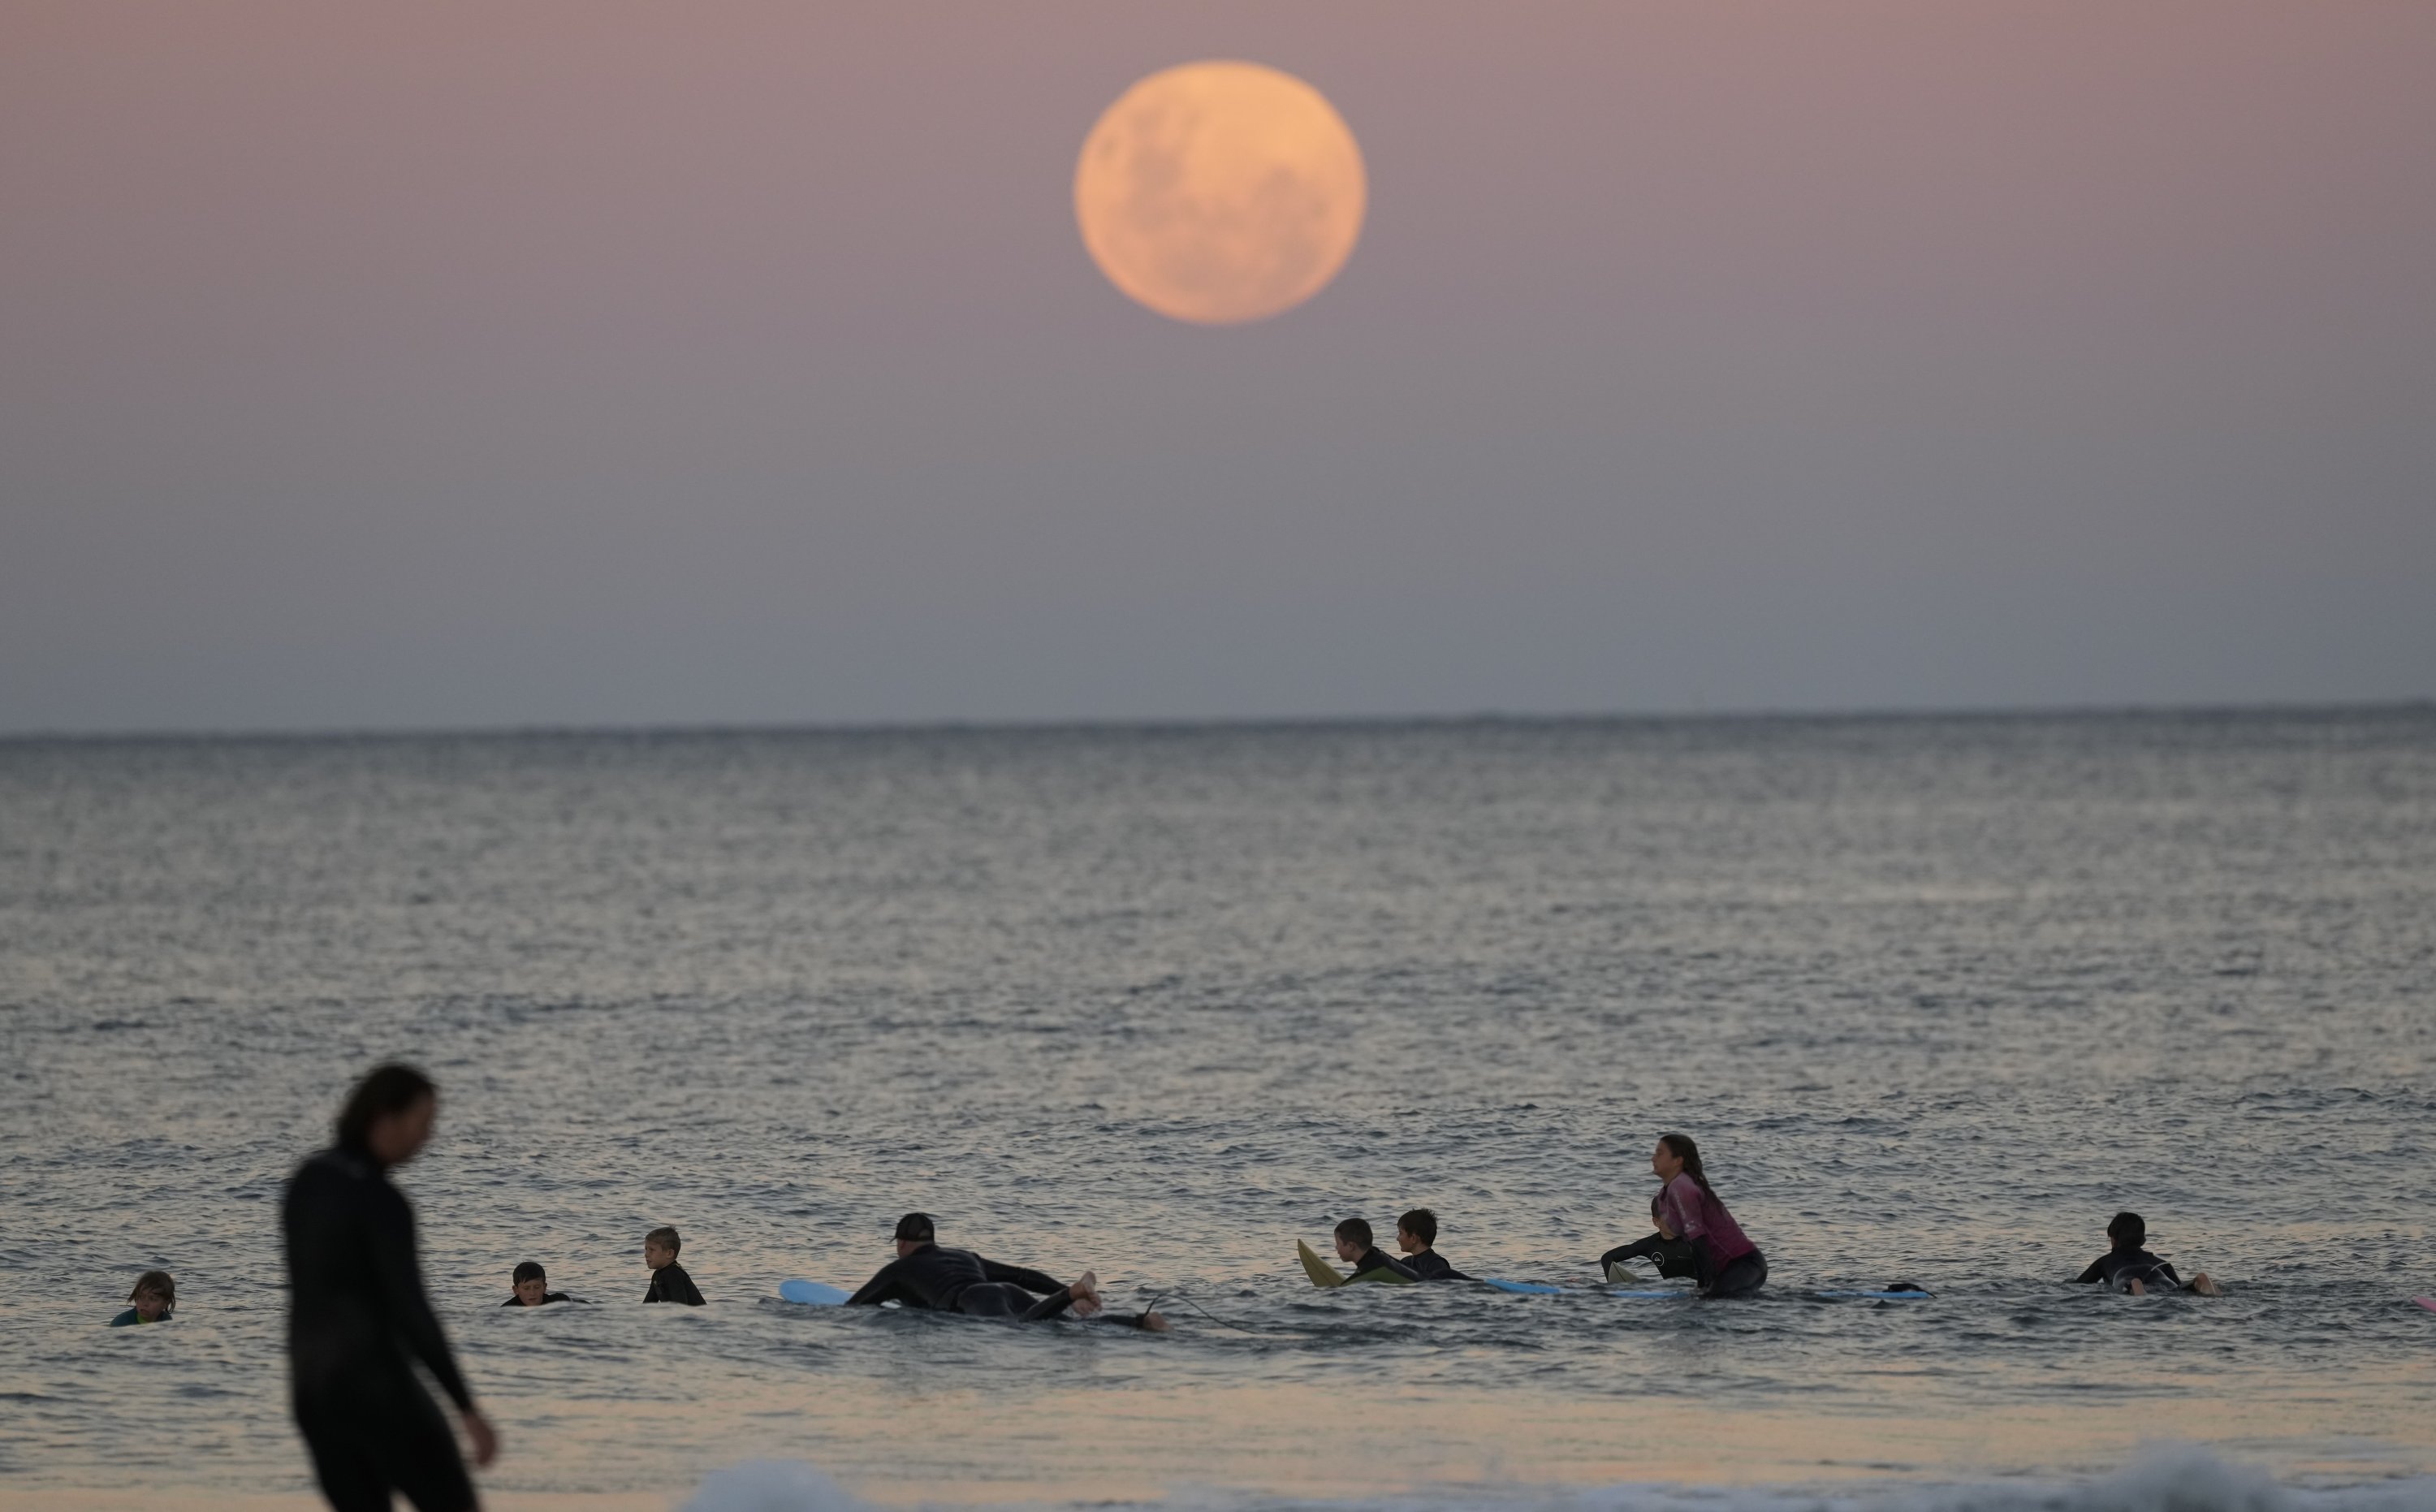 Surfers wait for waves as the moon rises in Sydney, Australia, May 26, 2021. (AP Photo)